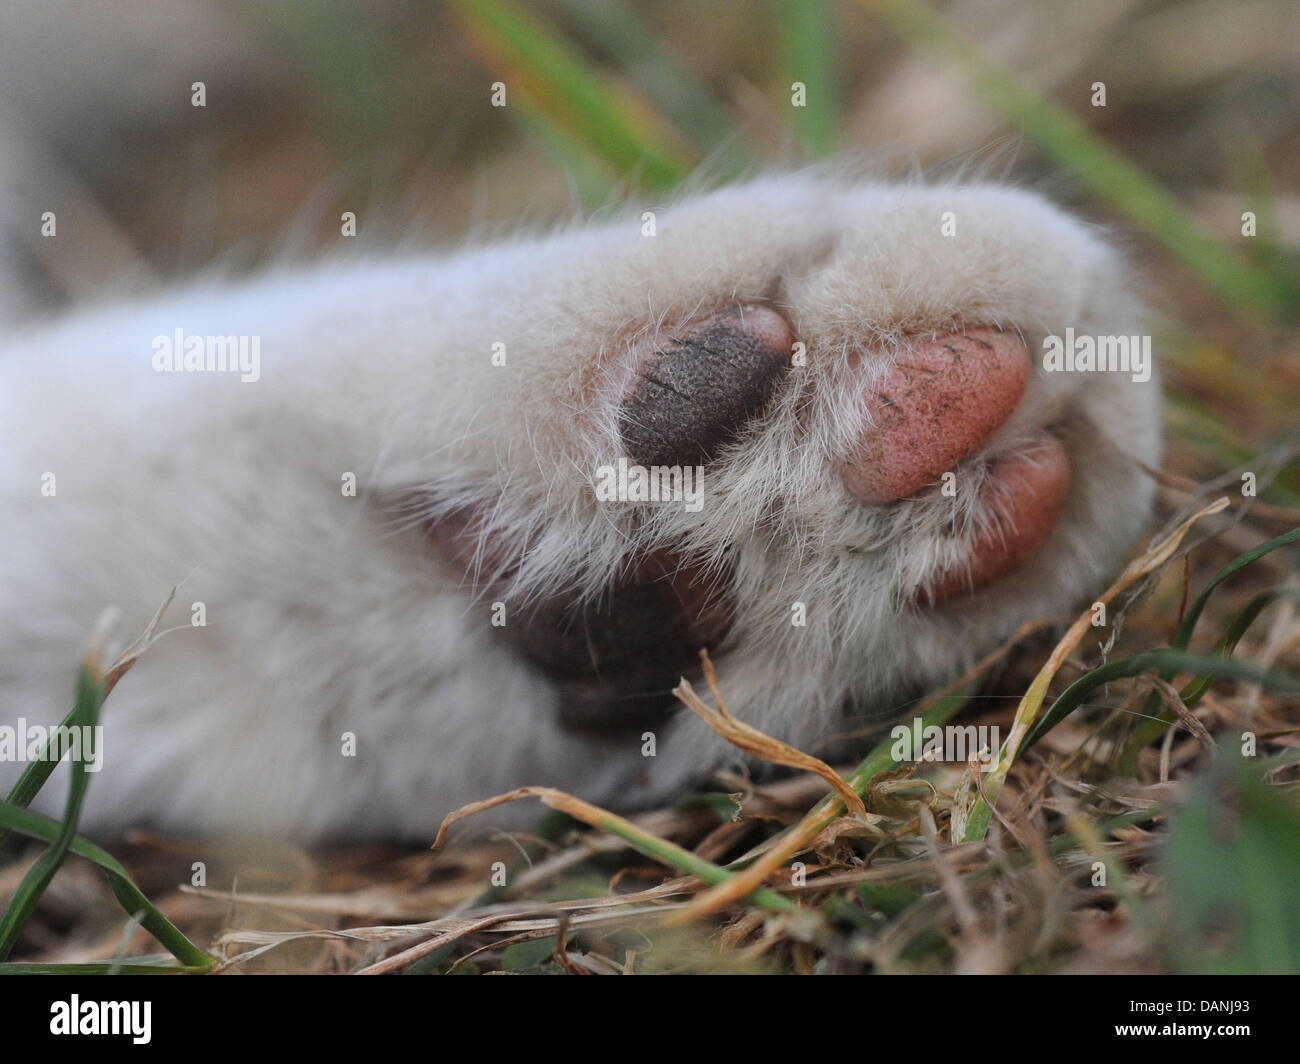 A close-up of a cat's paw. Stock Photo